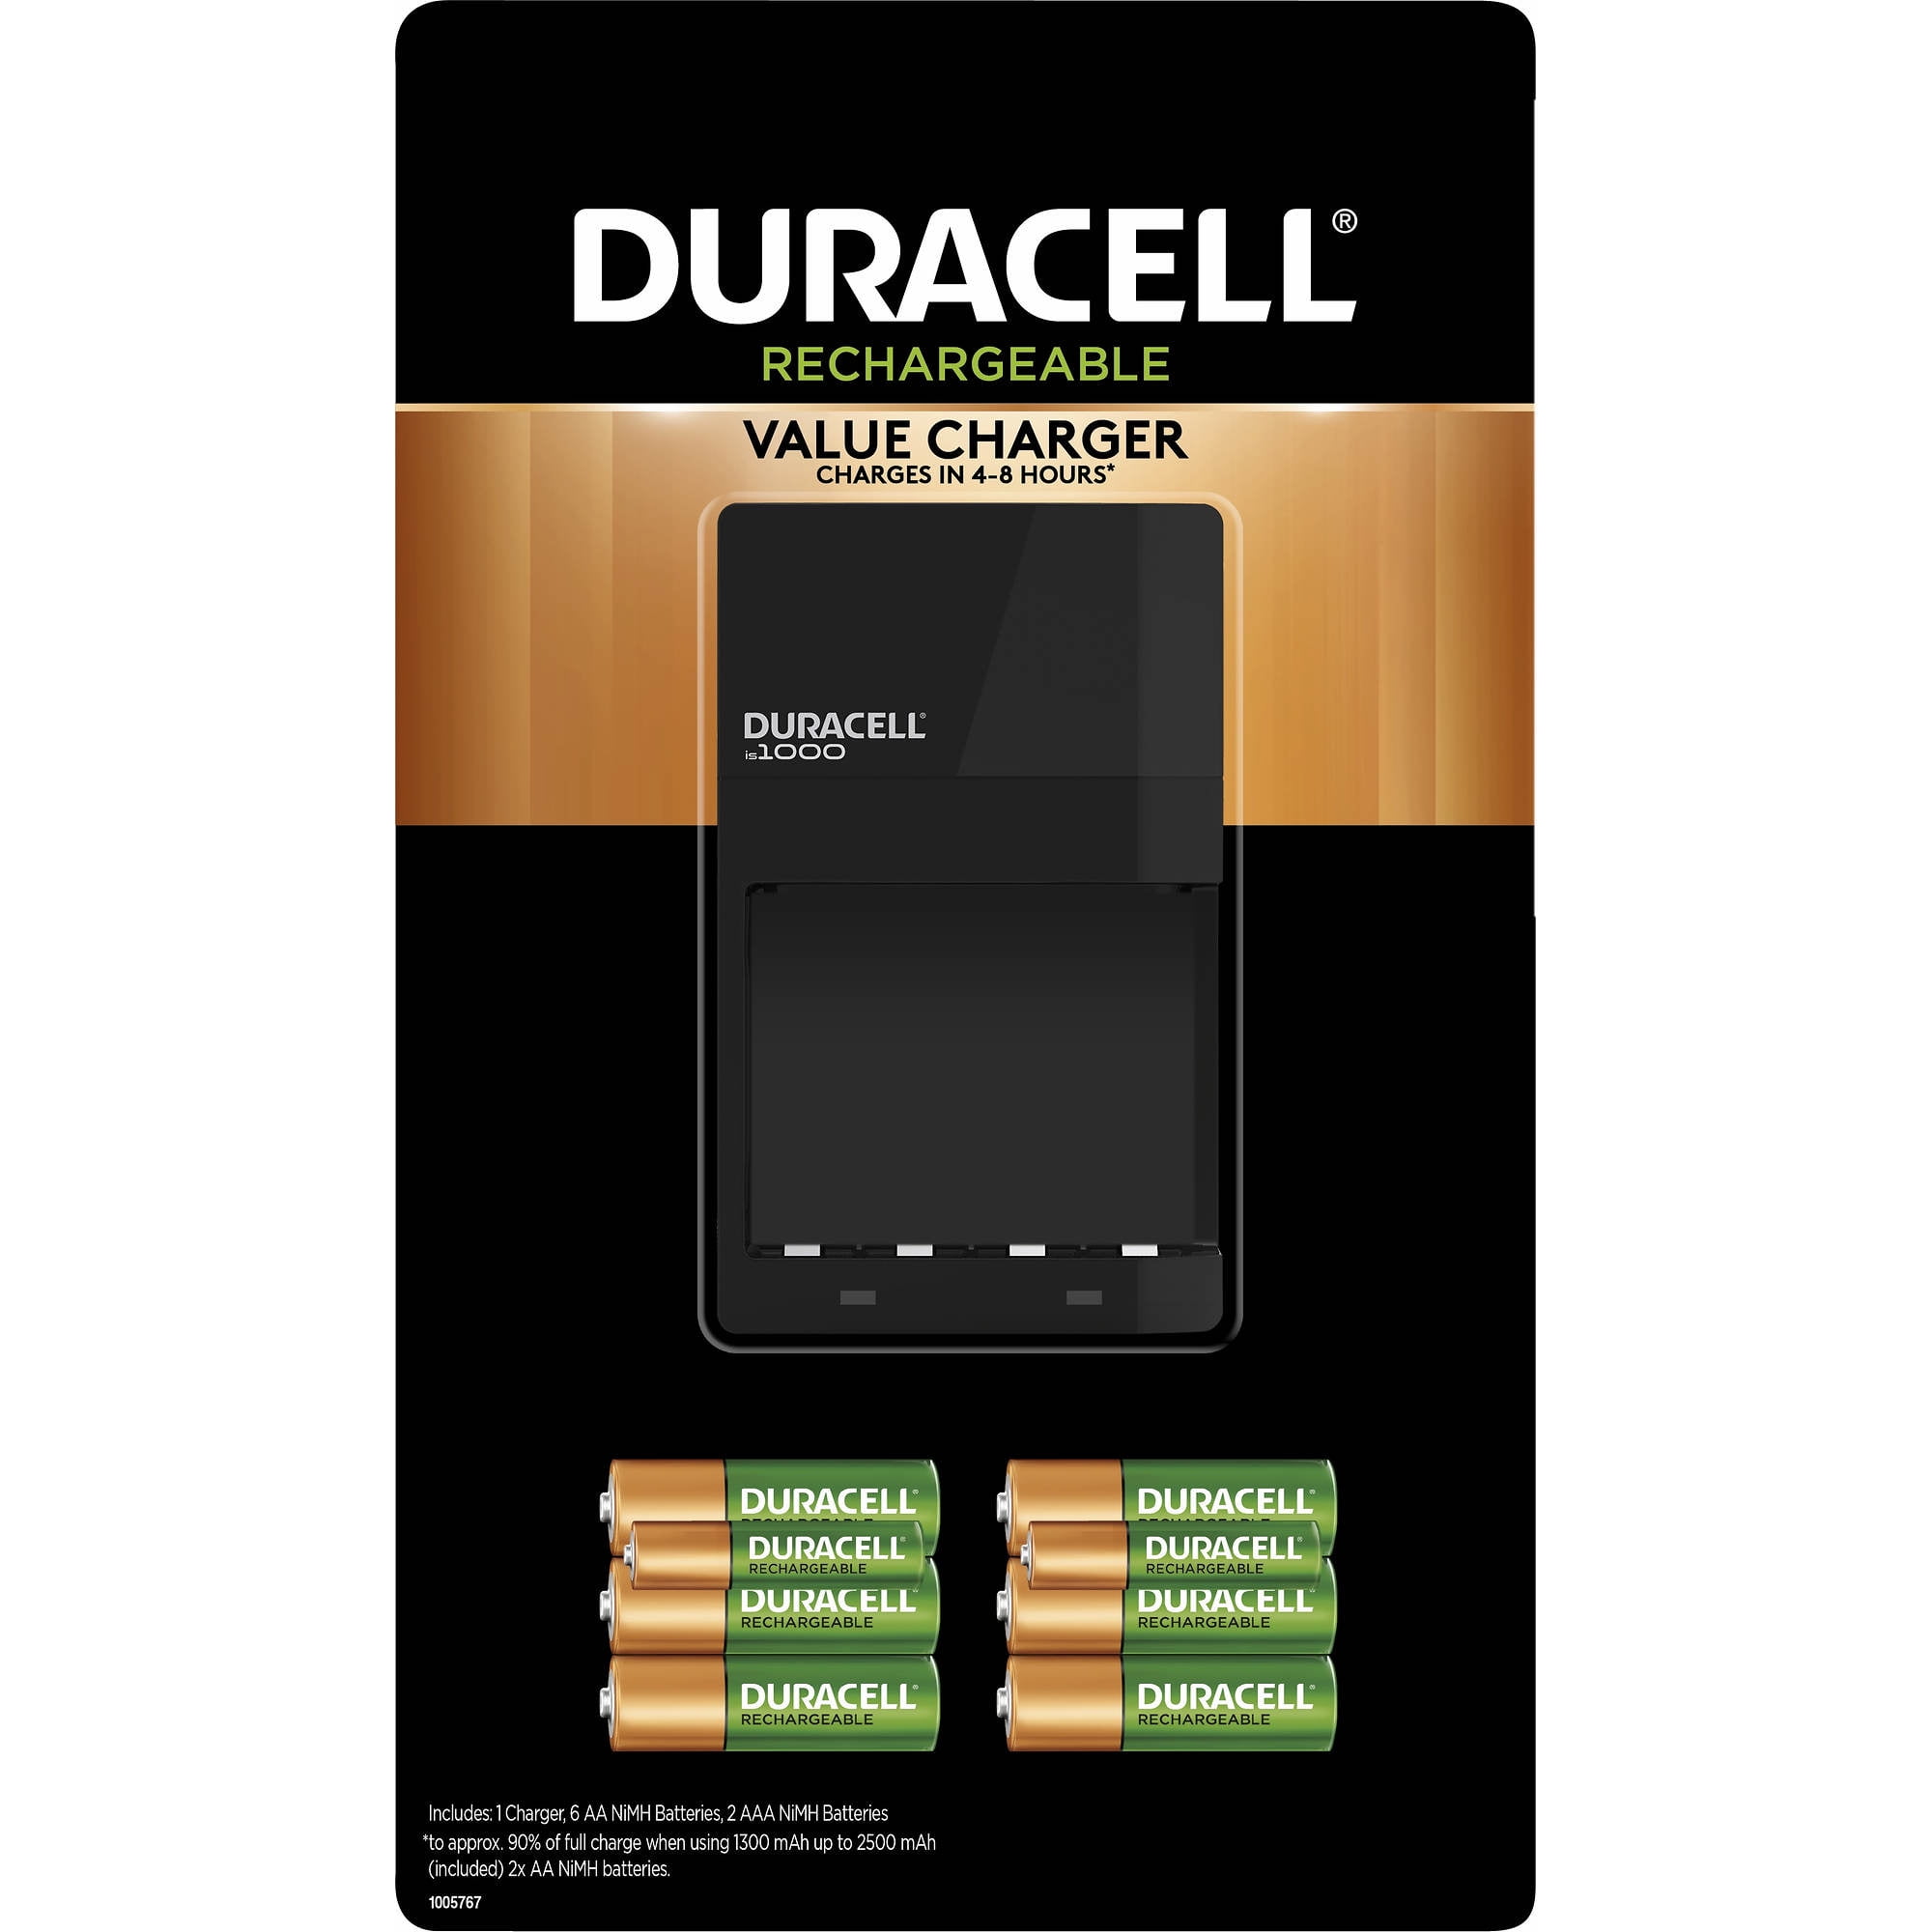 Duracell Rechargeable Value Charger with 6AA and AAA NiMH Batteries - Walmart.com